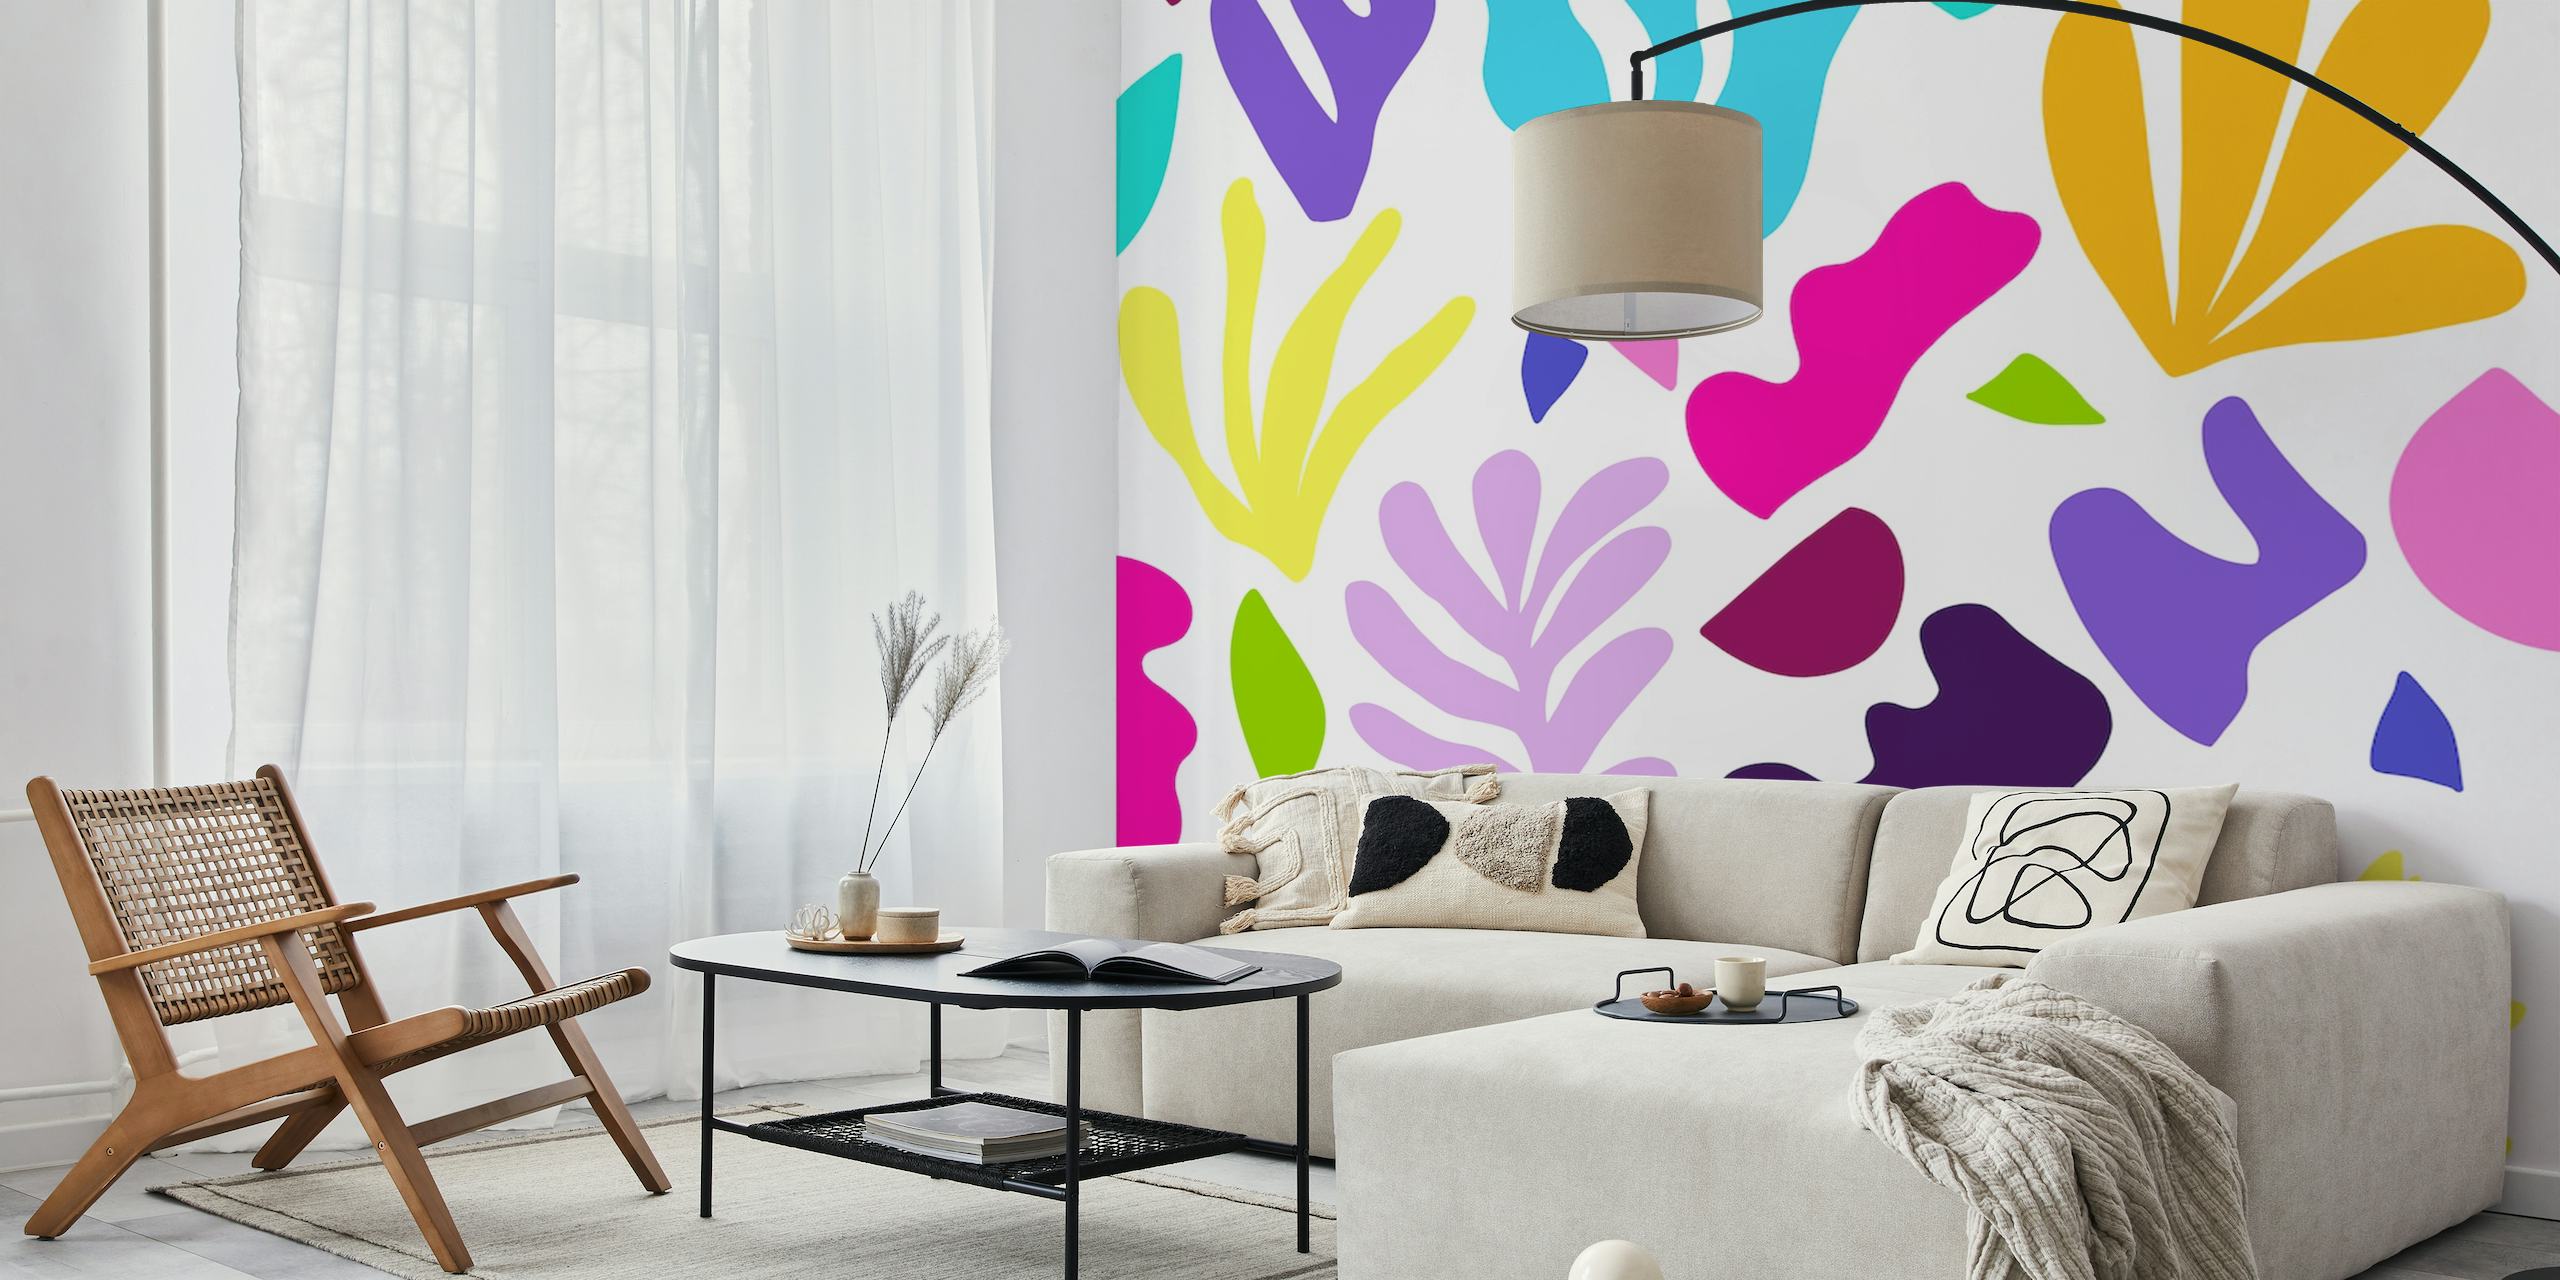 Colorful abstract seagrass and geometric shapes wall mural design